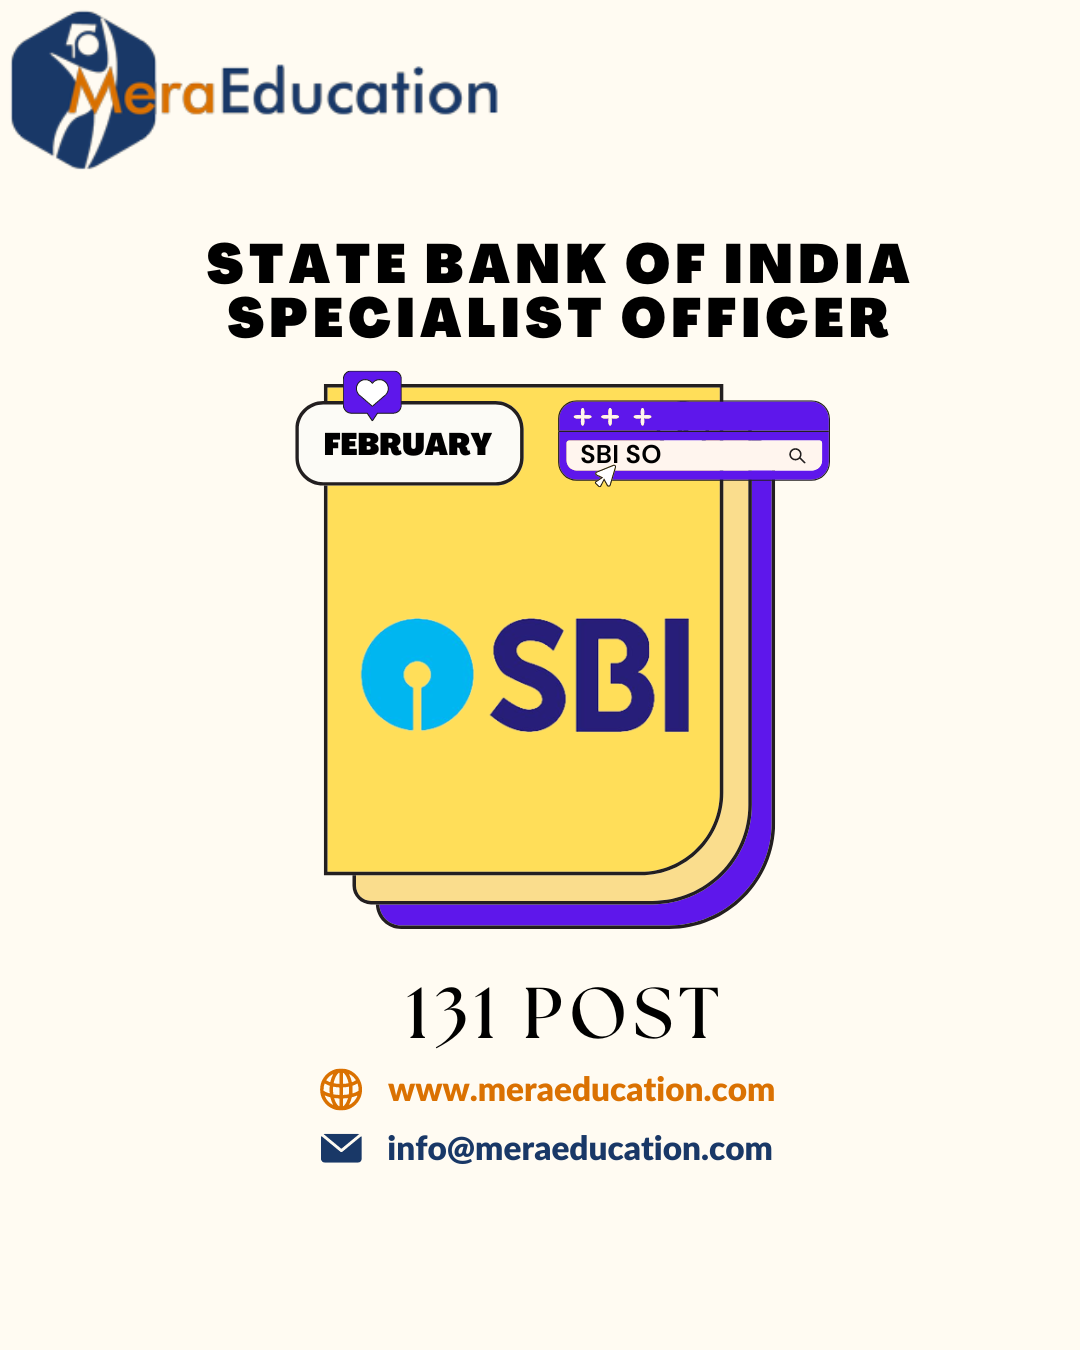 State Bank of India Specialist Officer